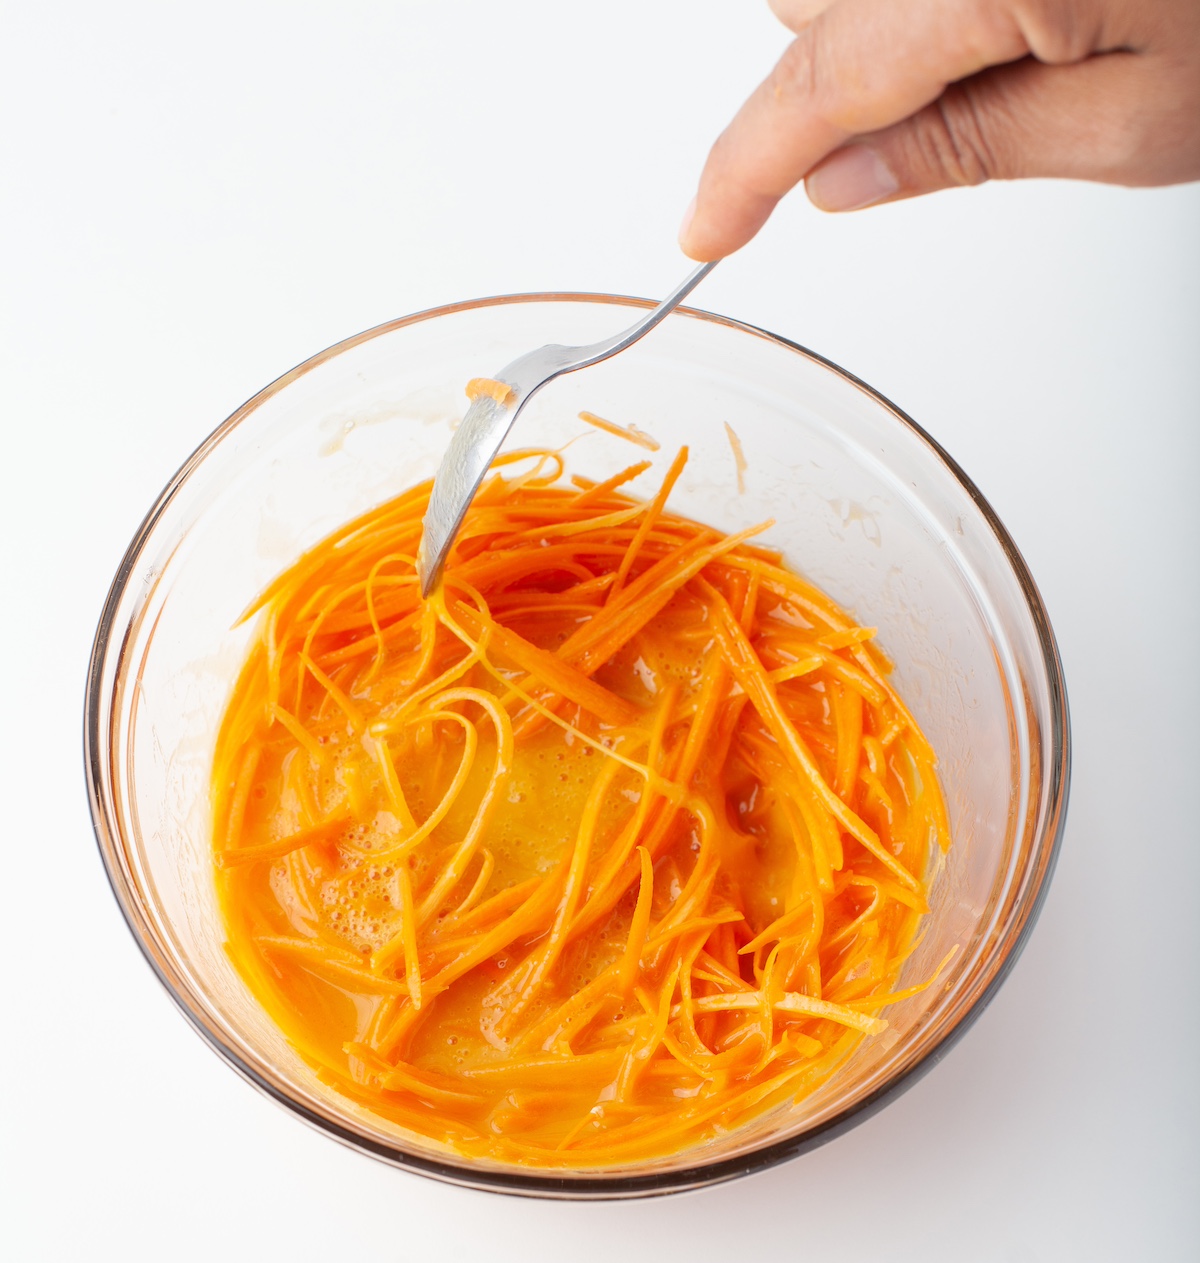 stirring carrots into a mixture of eggs, oil, and vanilla